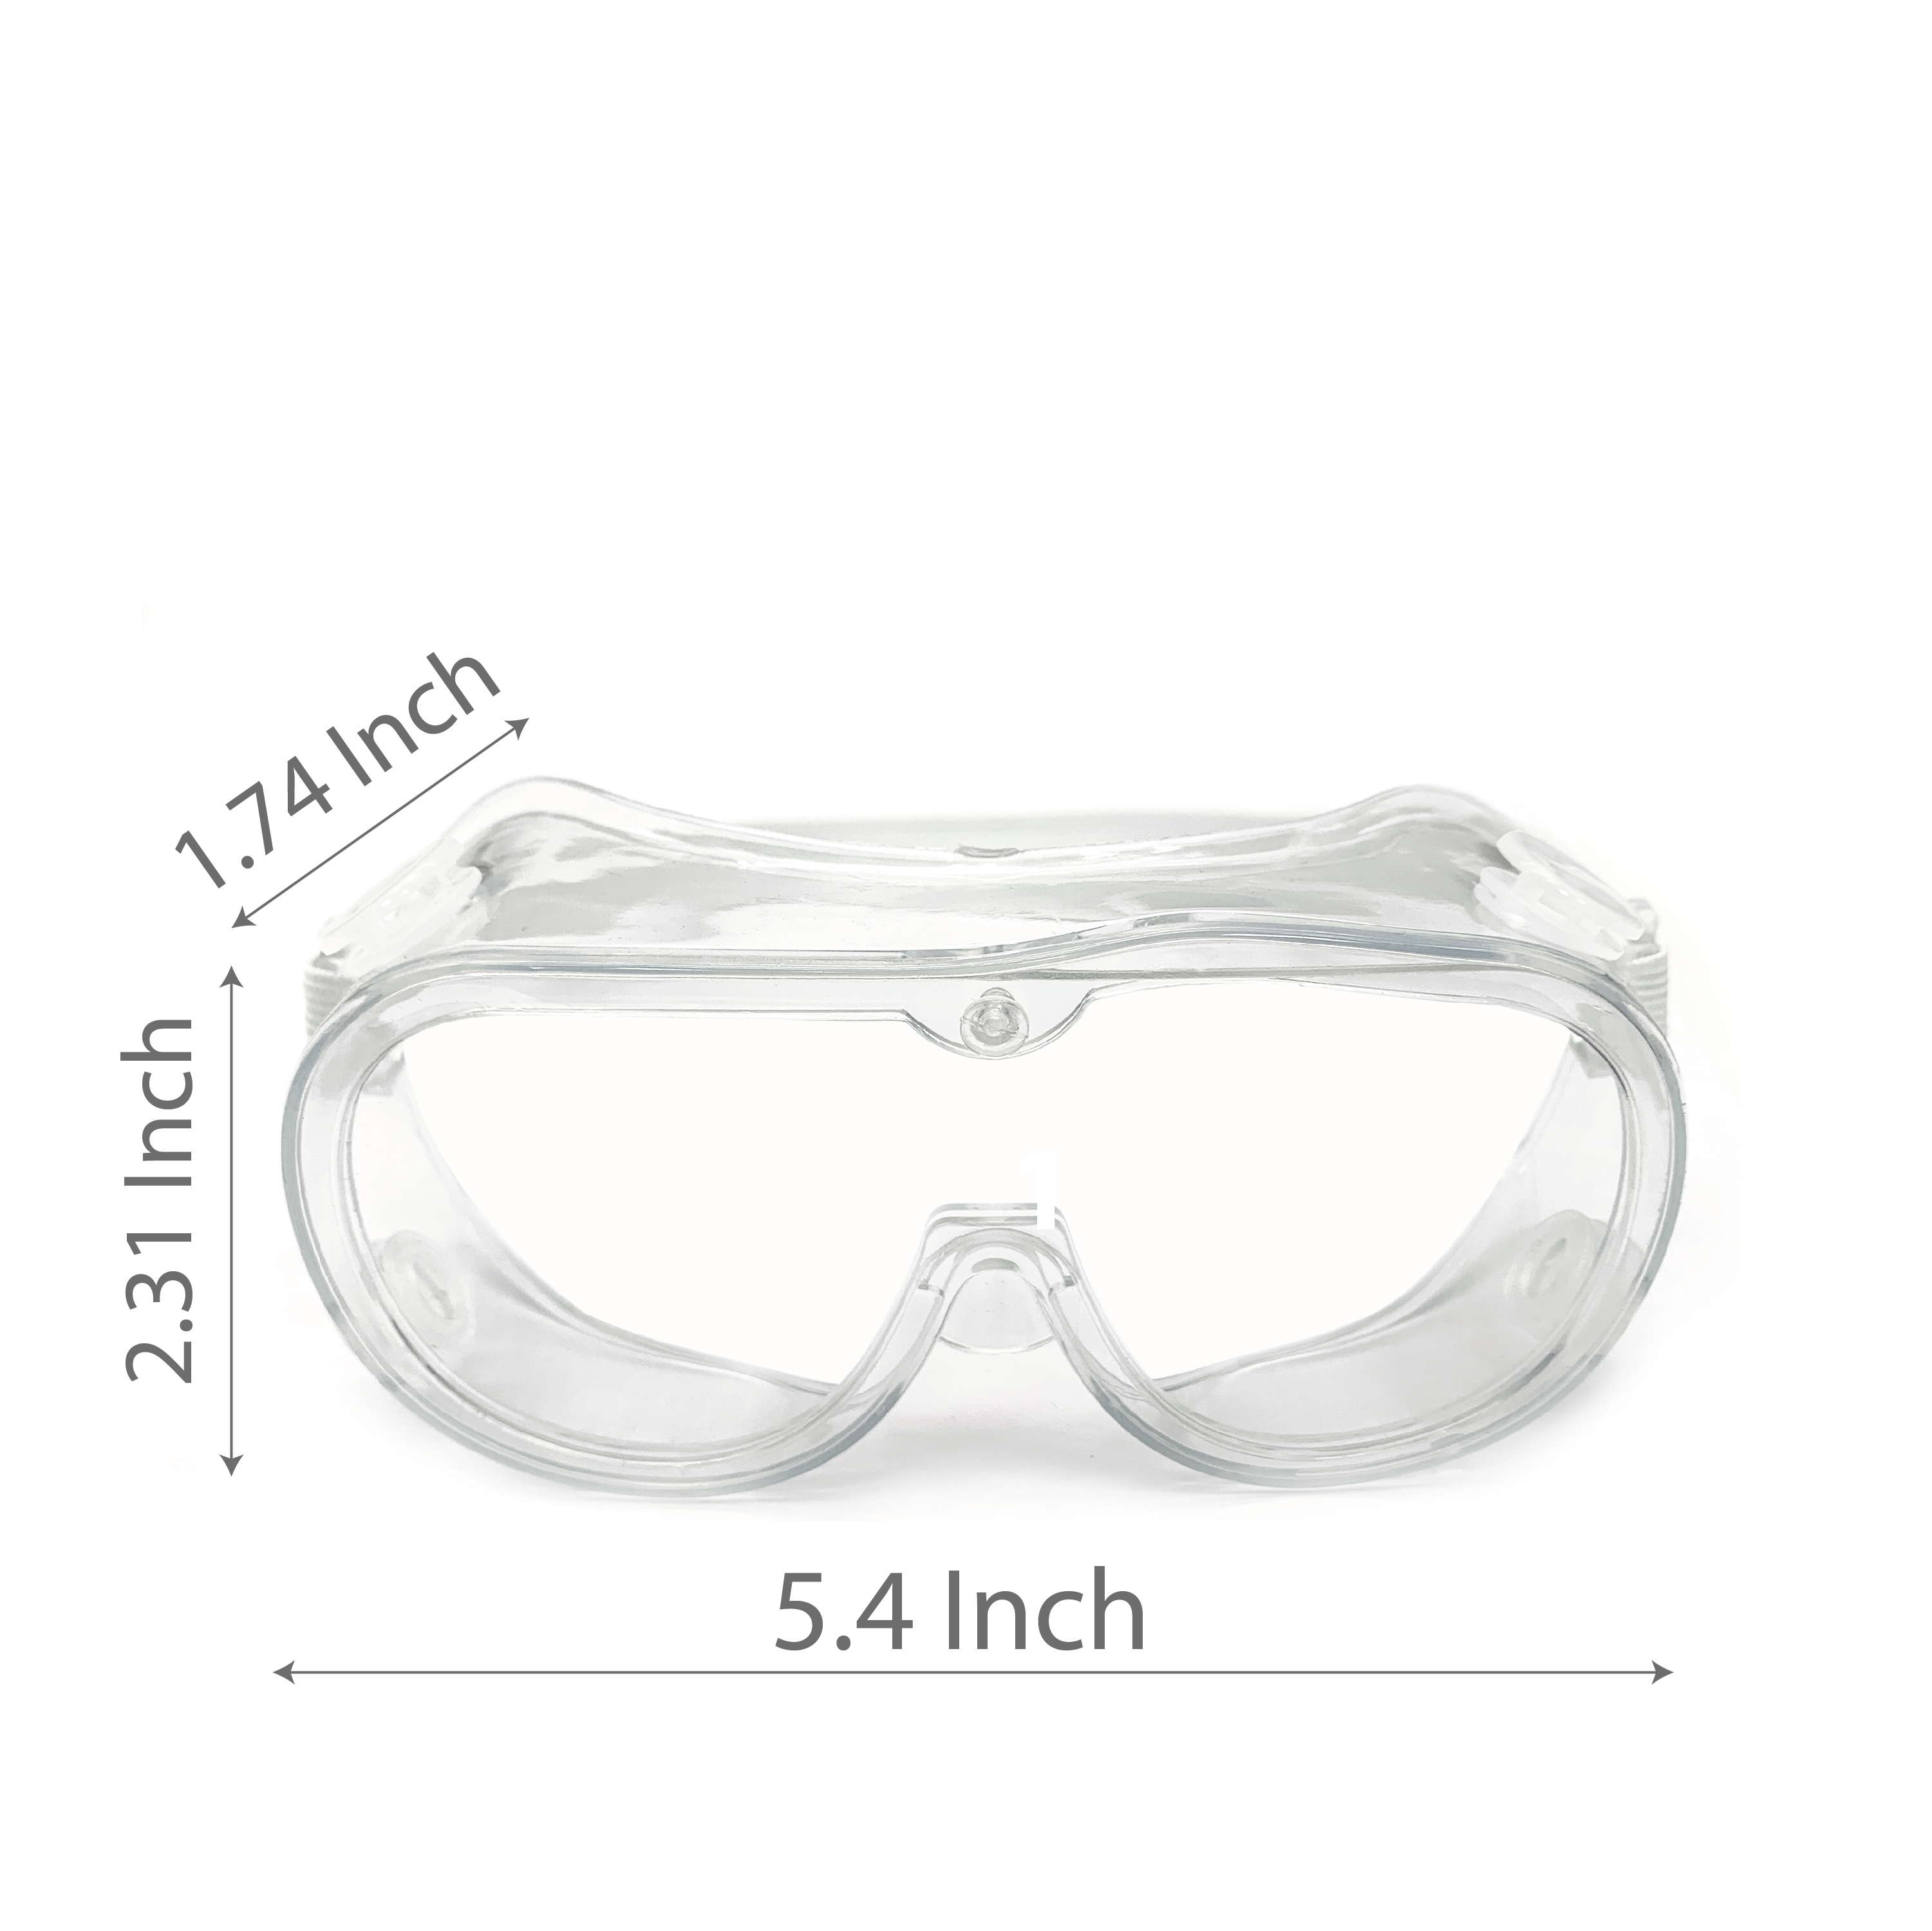 Zak Personal Protective Equipment (PPE) Protective Goggles, Clear, 2-piece set slideshow image 6